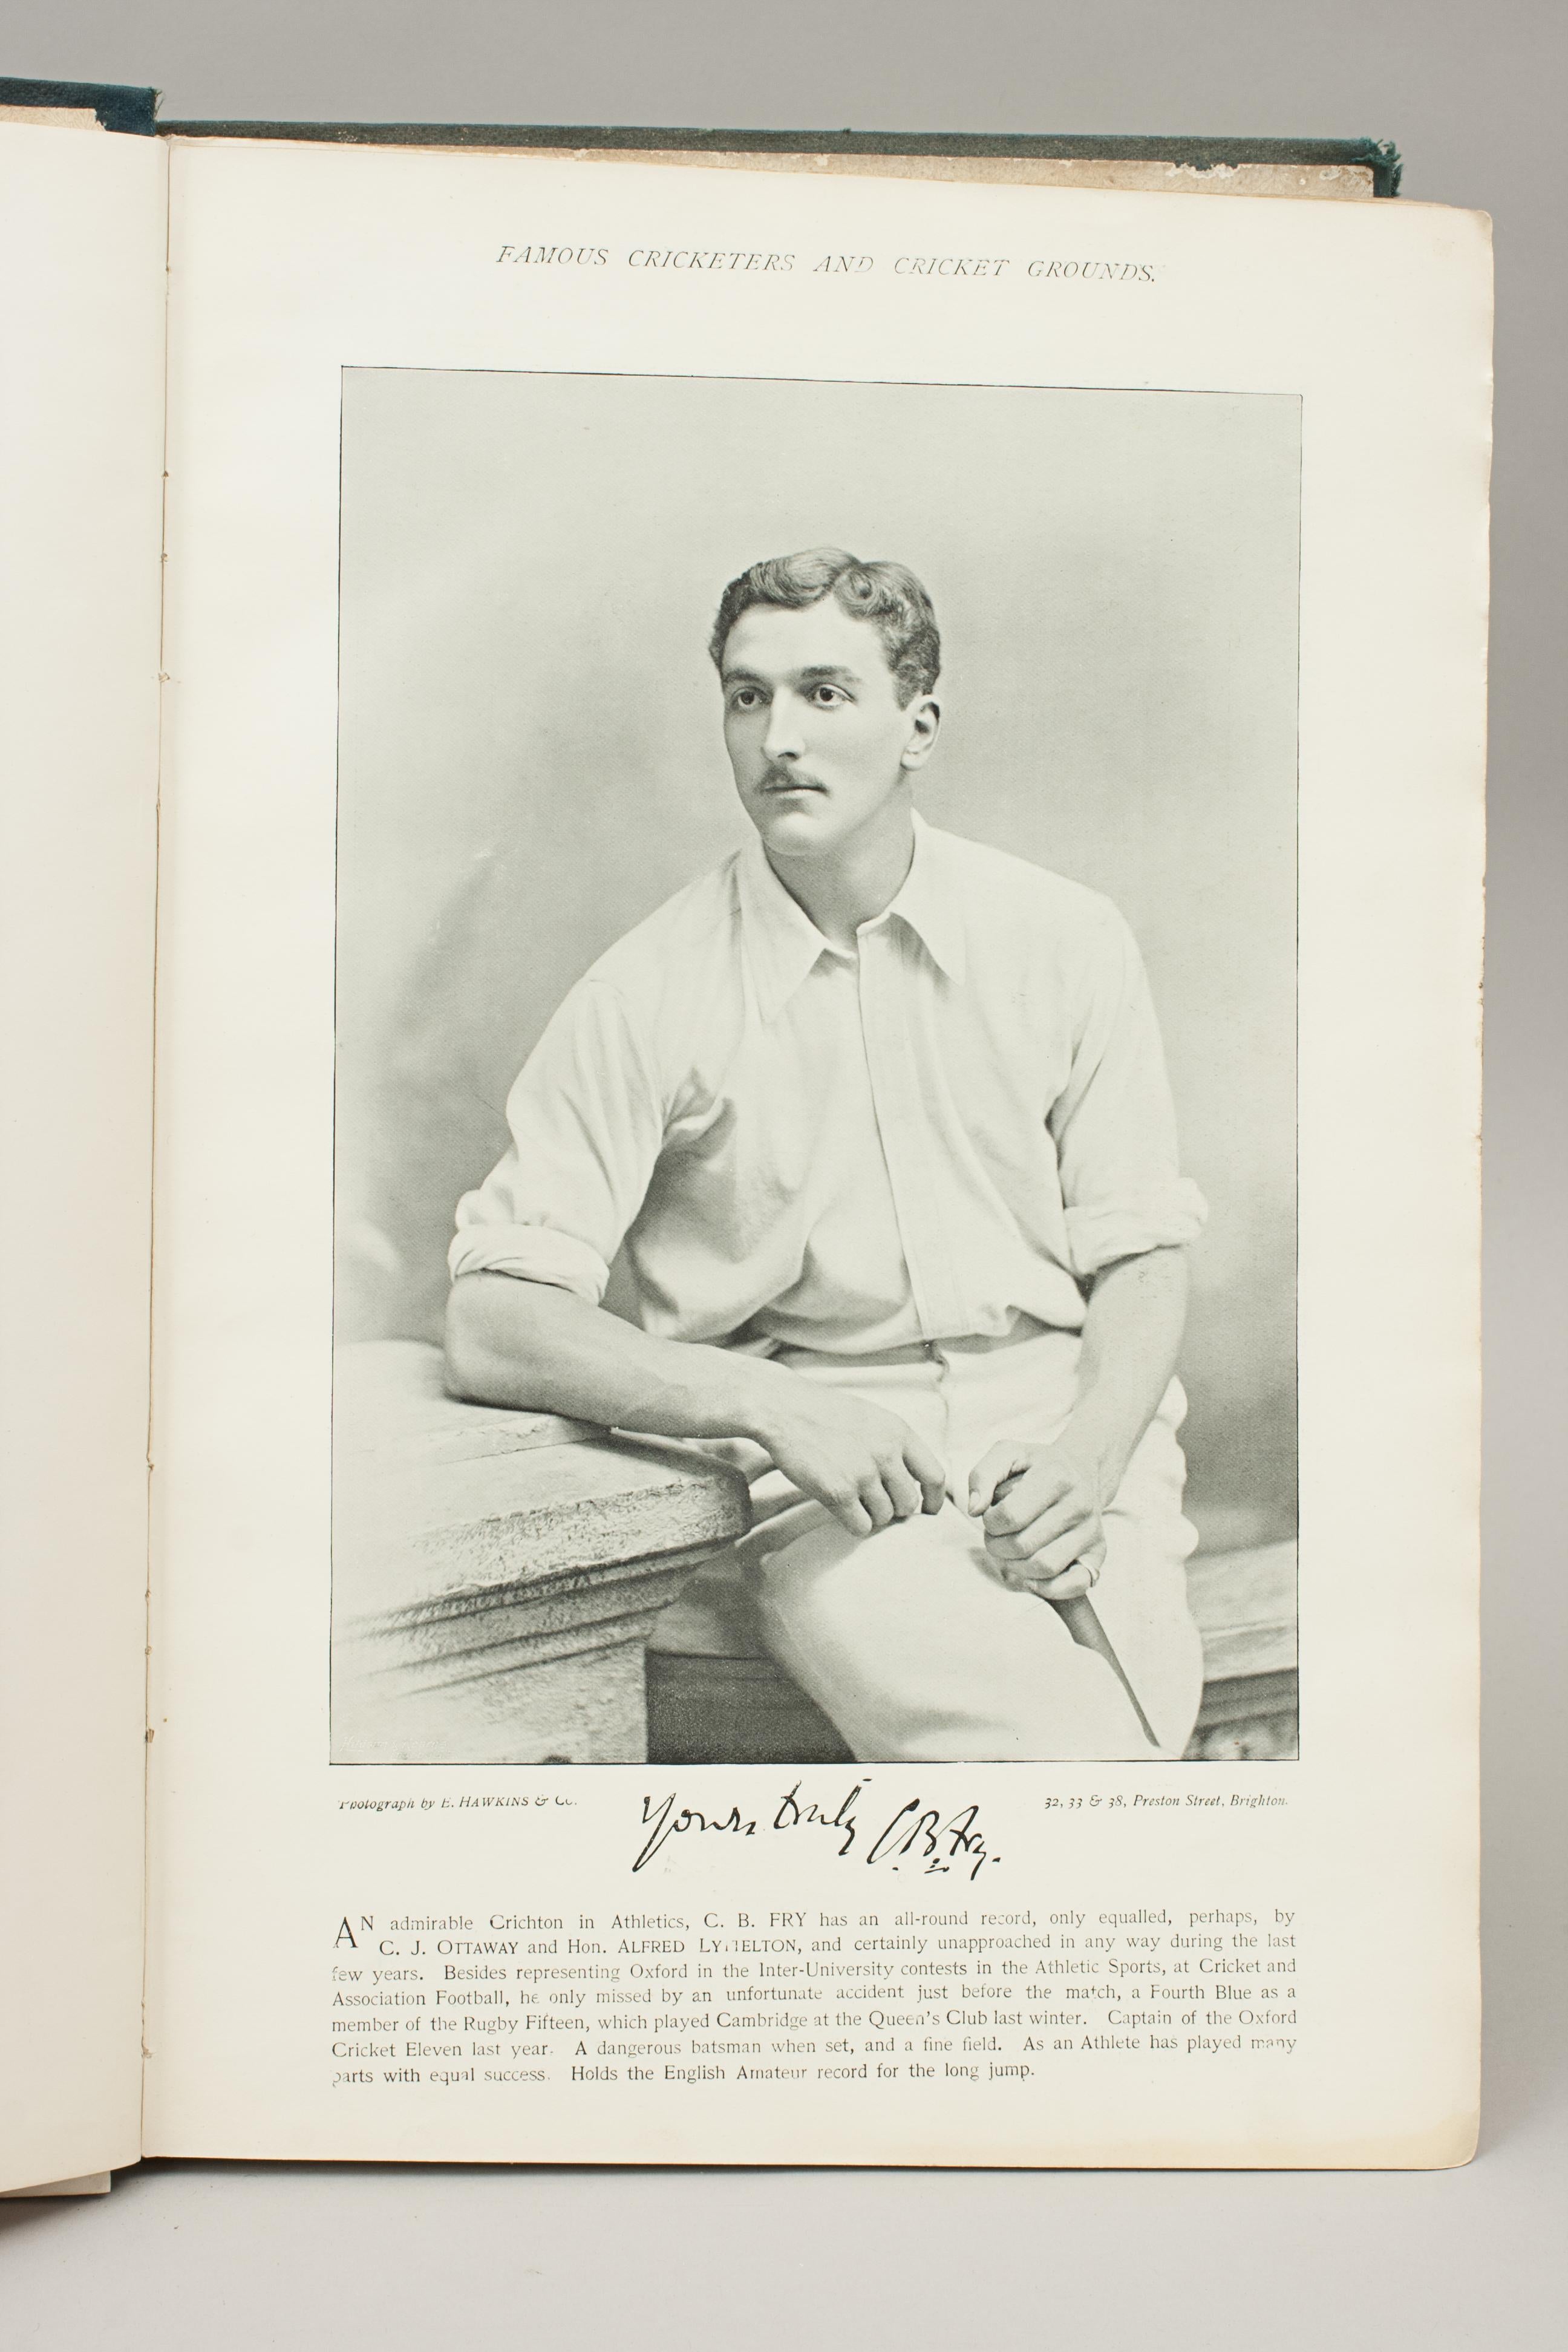 Late 19th Century Cricket Book, Famous Cricketers and Cricket Grounds, 1895